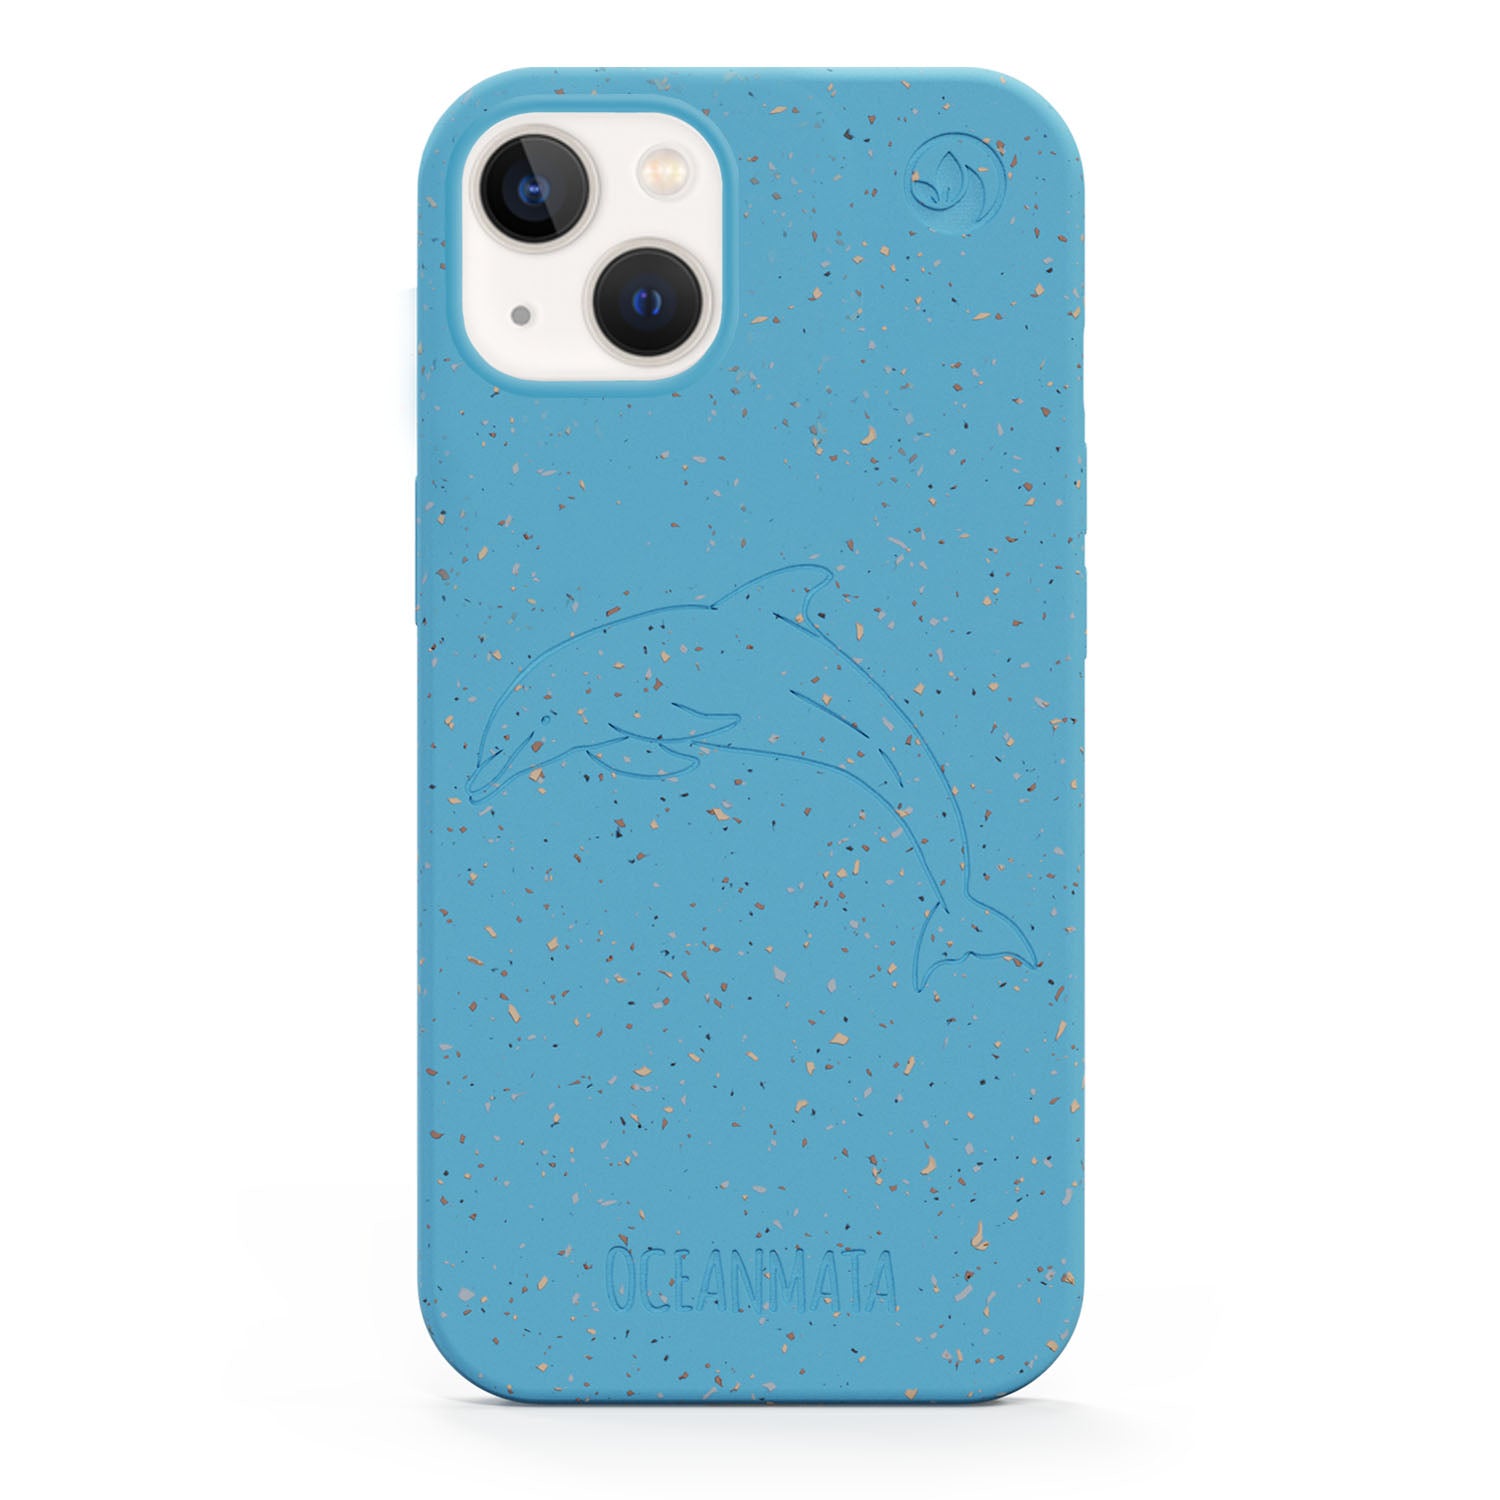 sustainable Apple iPhone case "Dolphin Edition